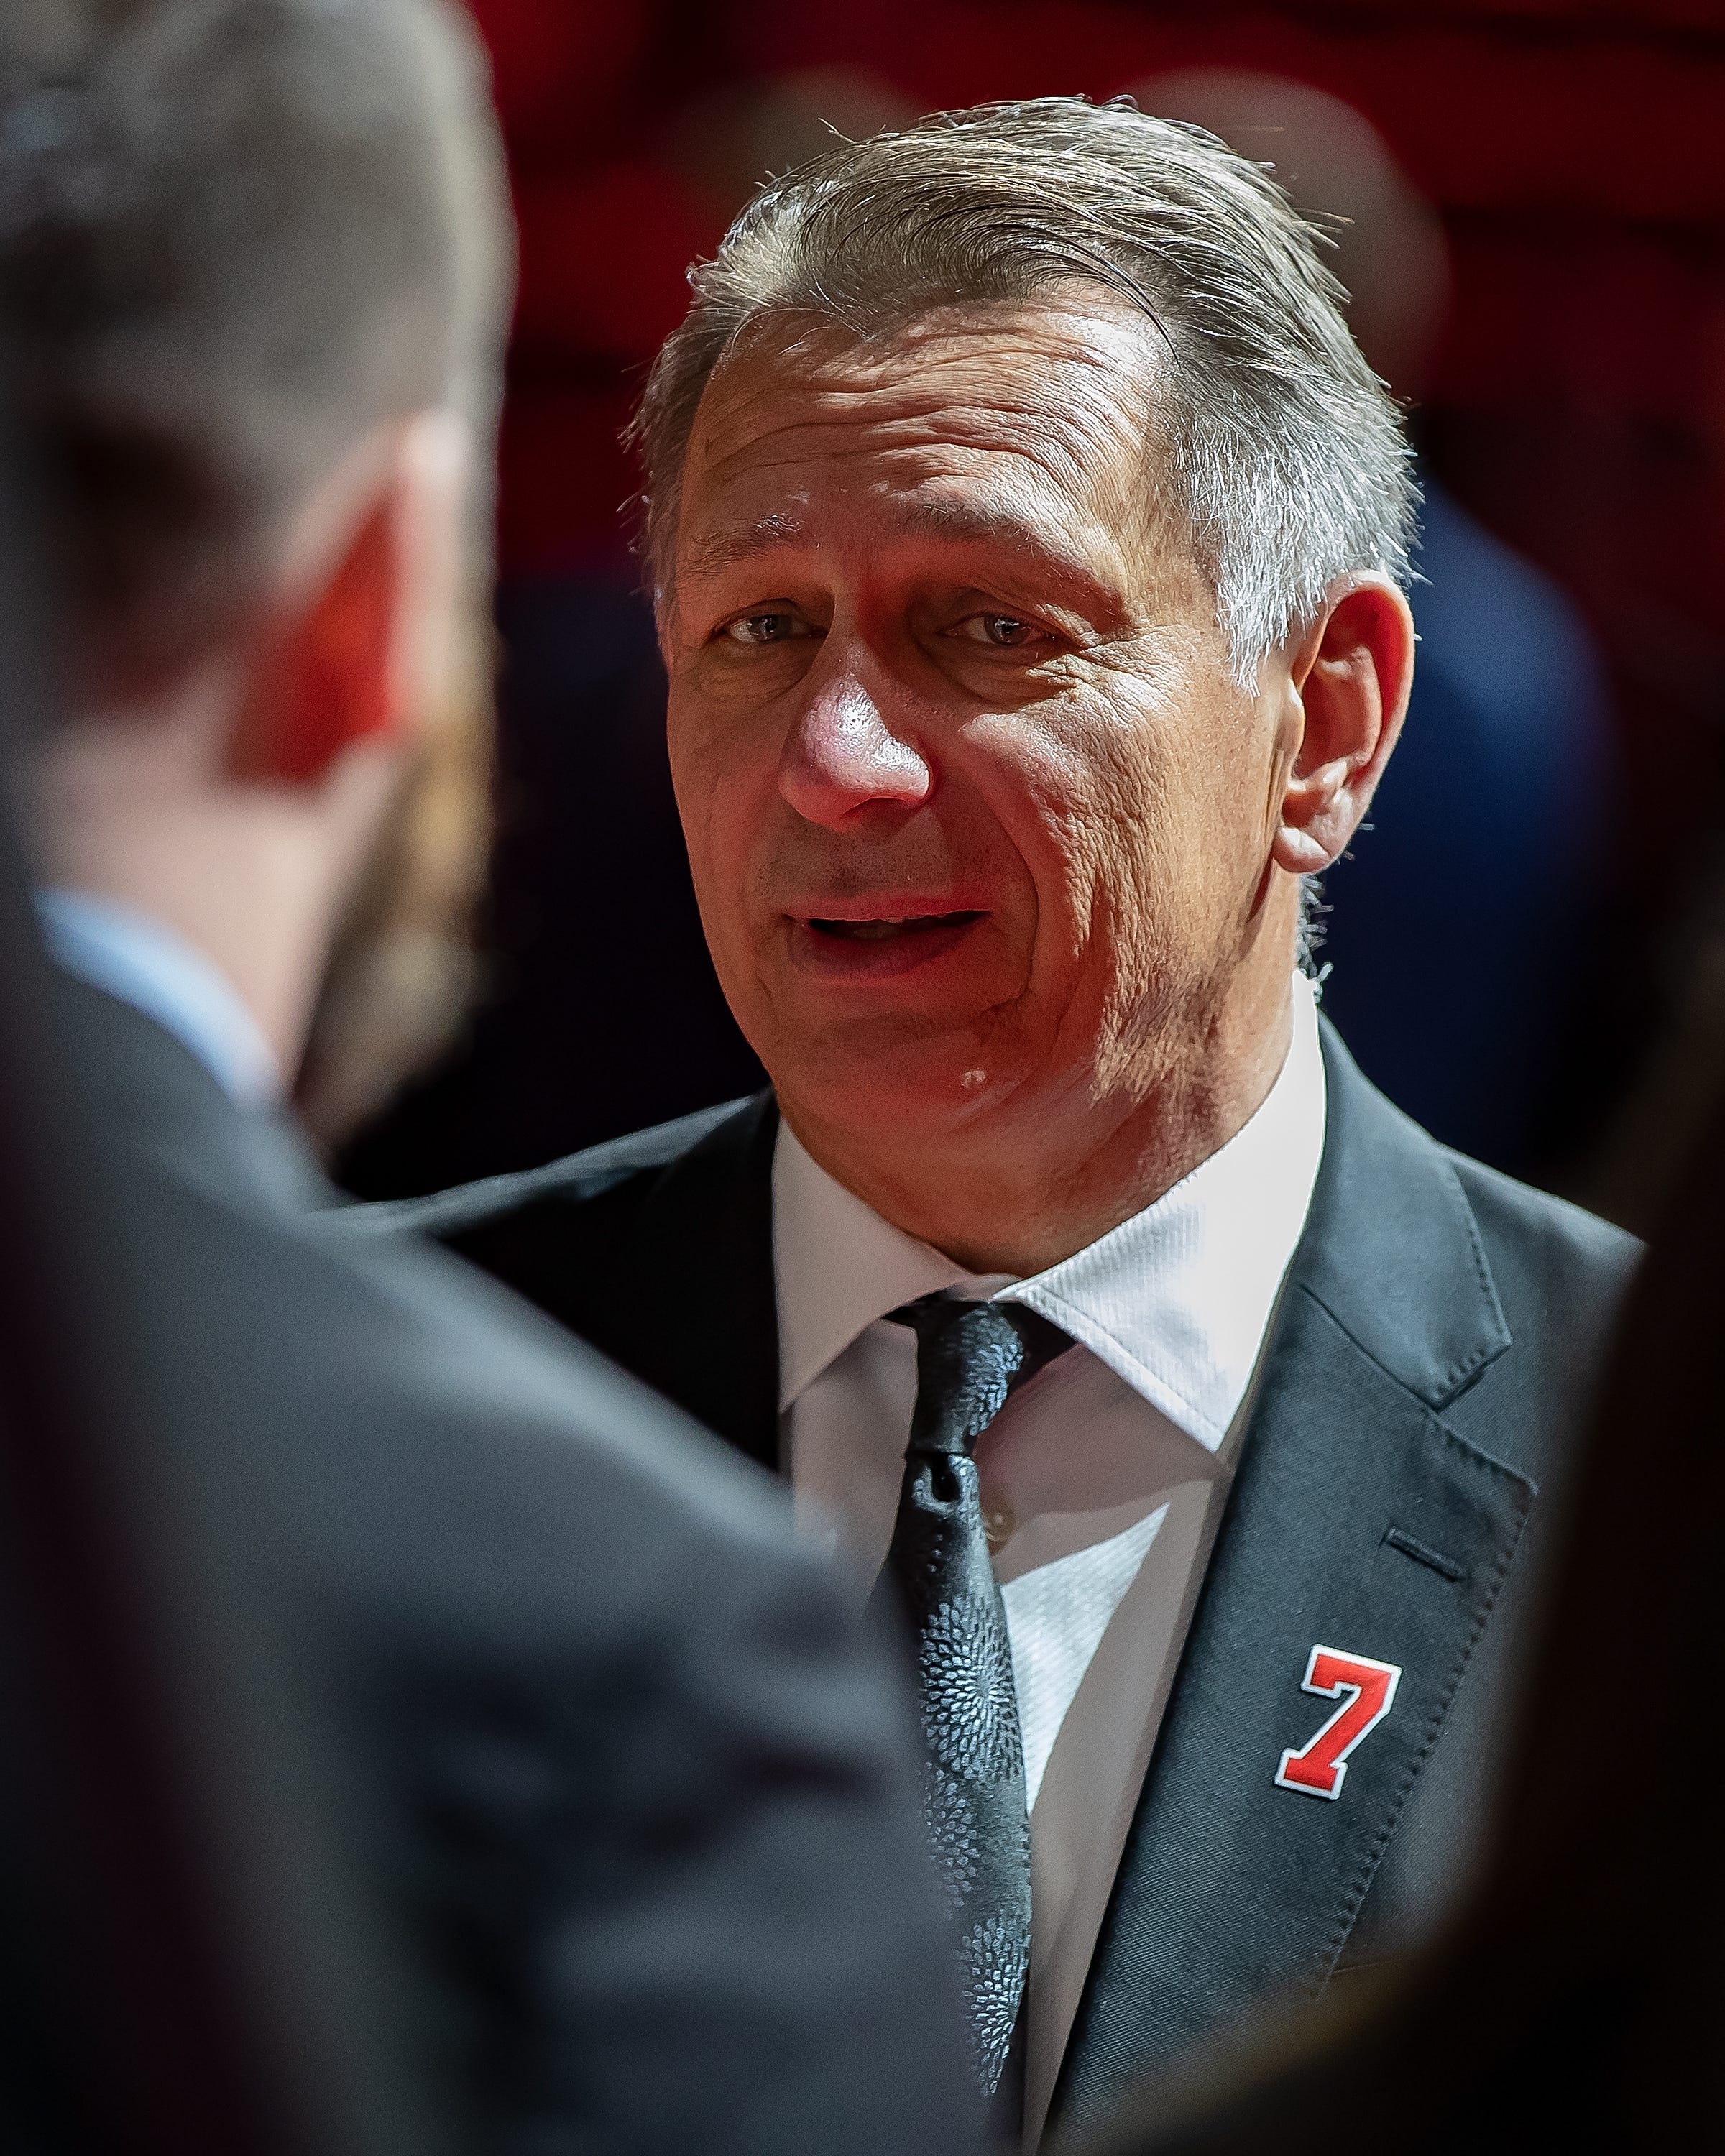 Opinion: Ken Holland built a winner. Now he has a chance to turn around Oilers franchise